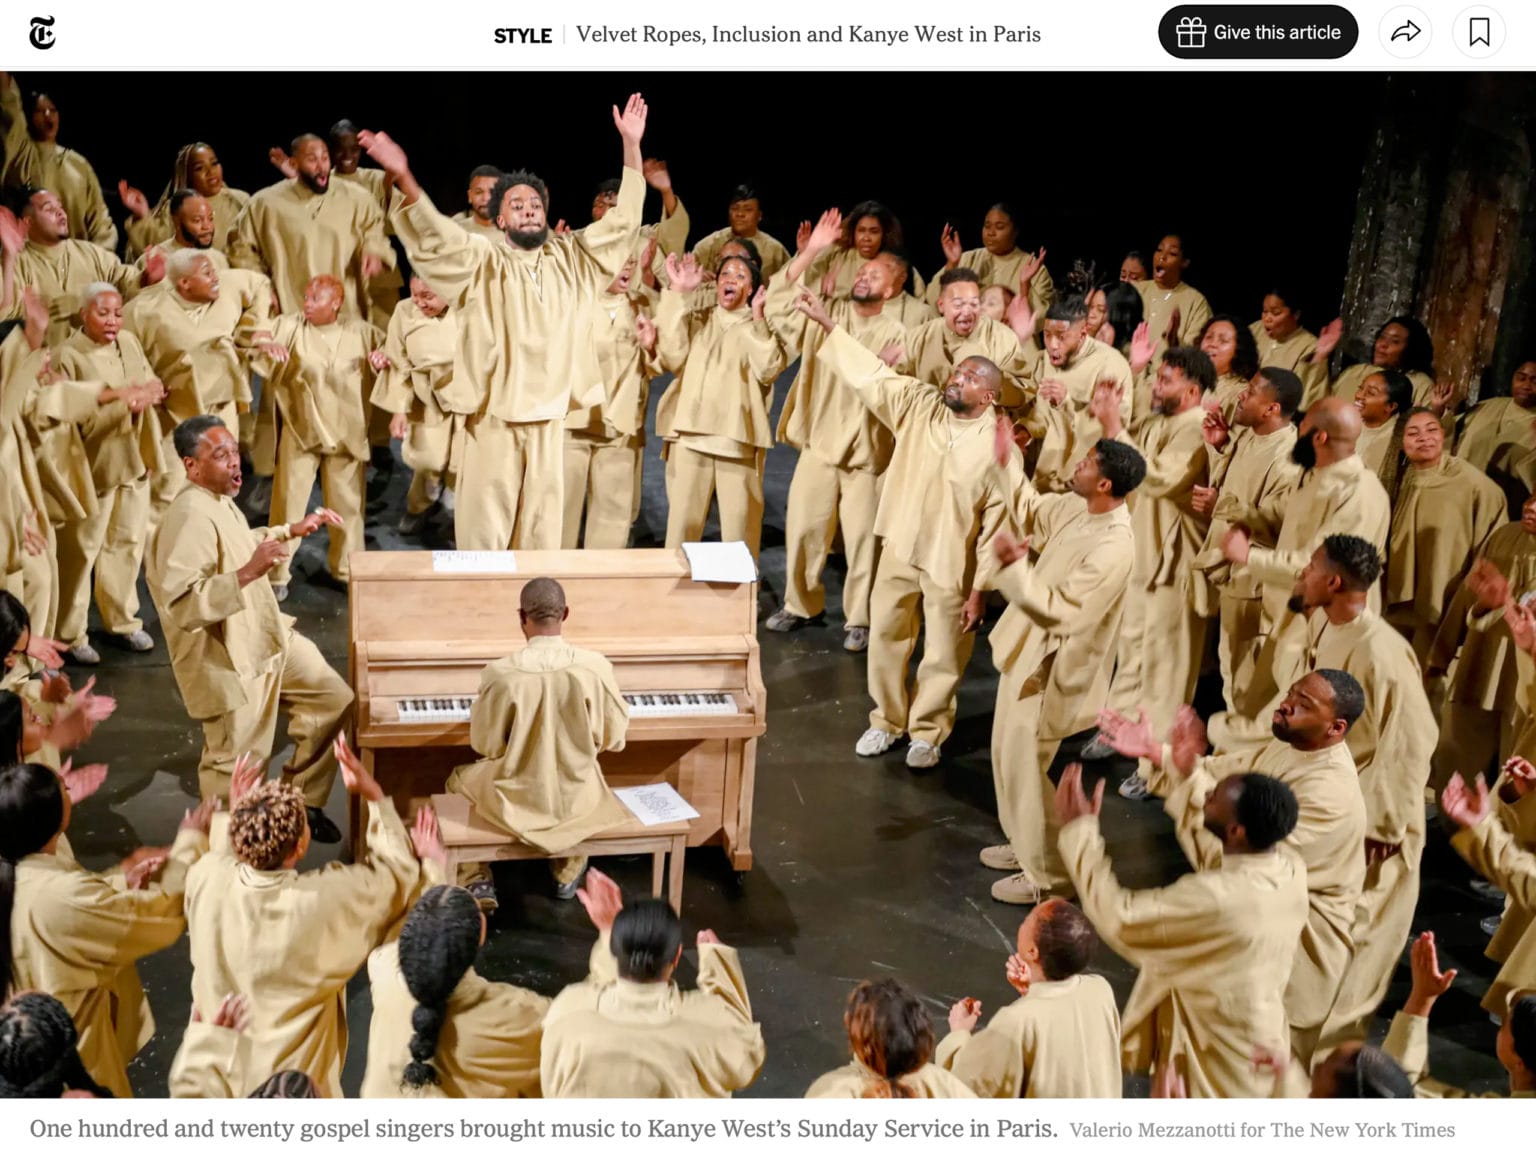 Kanye West Sunday Service in Paris, Photo by Valerio Mezzanotti for The New York Times